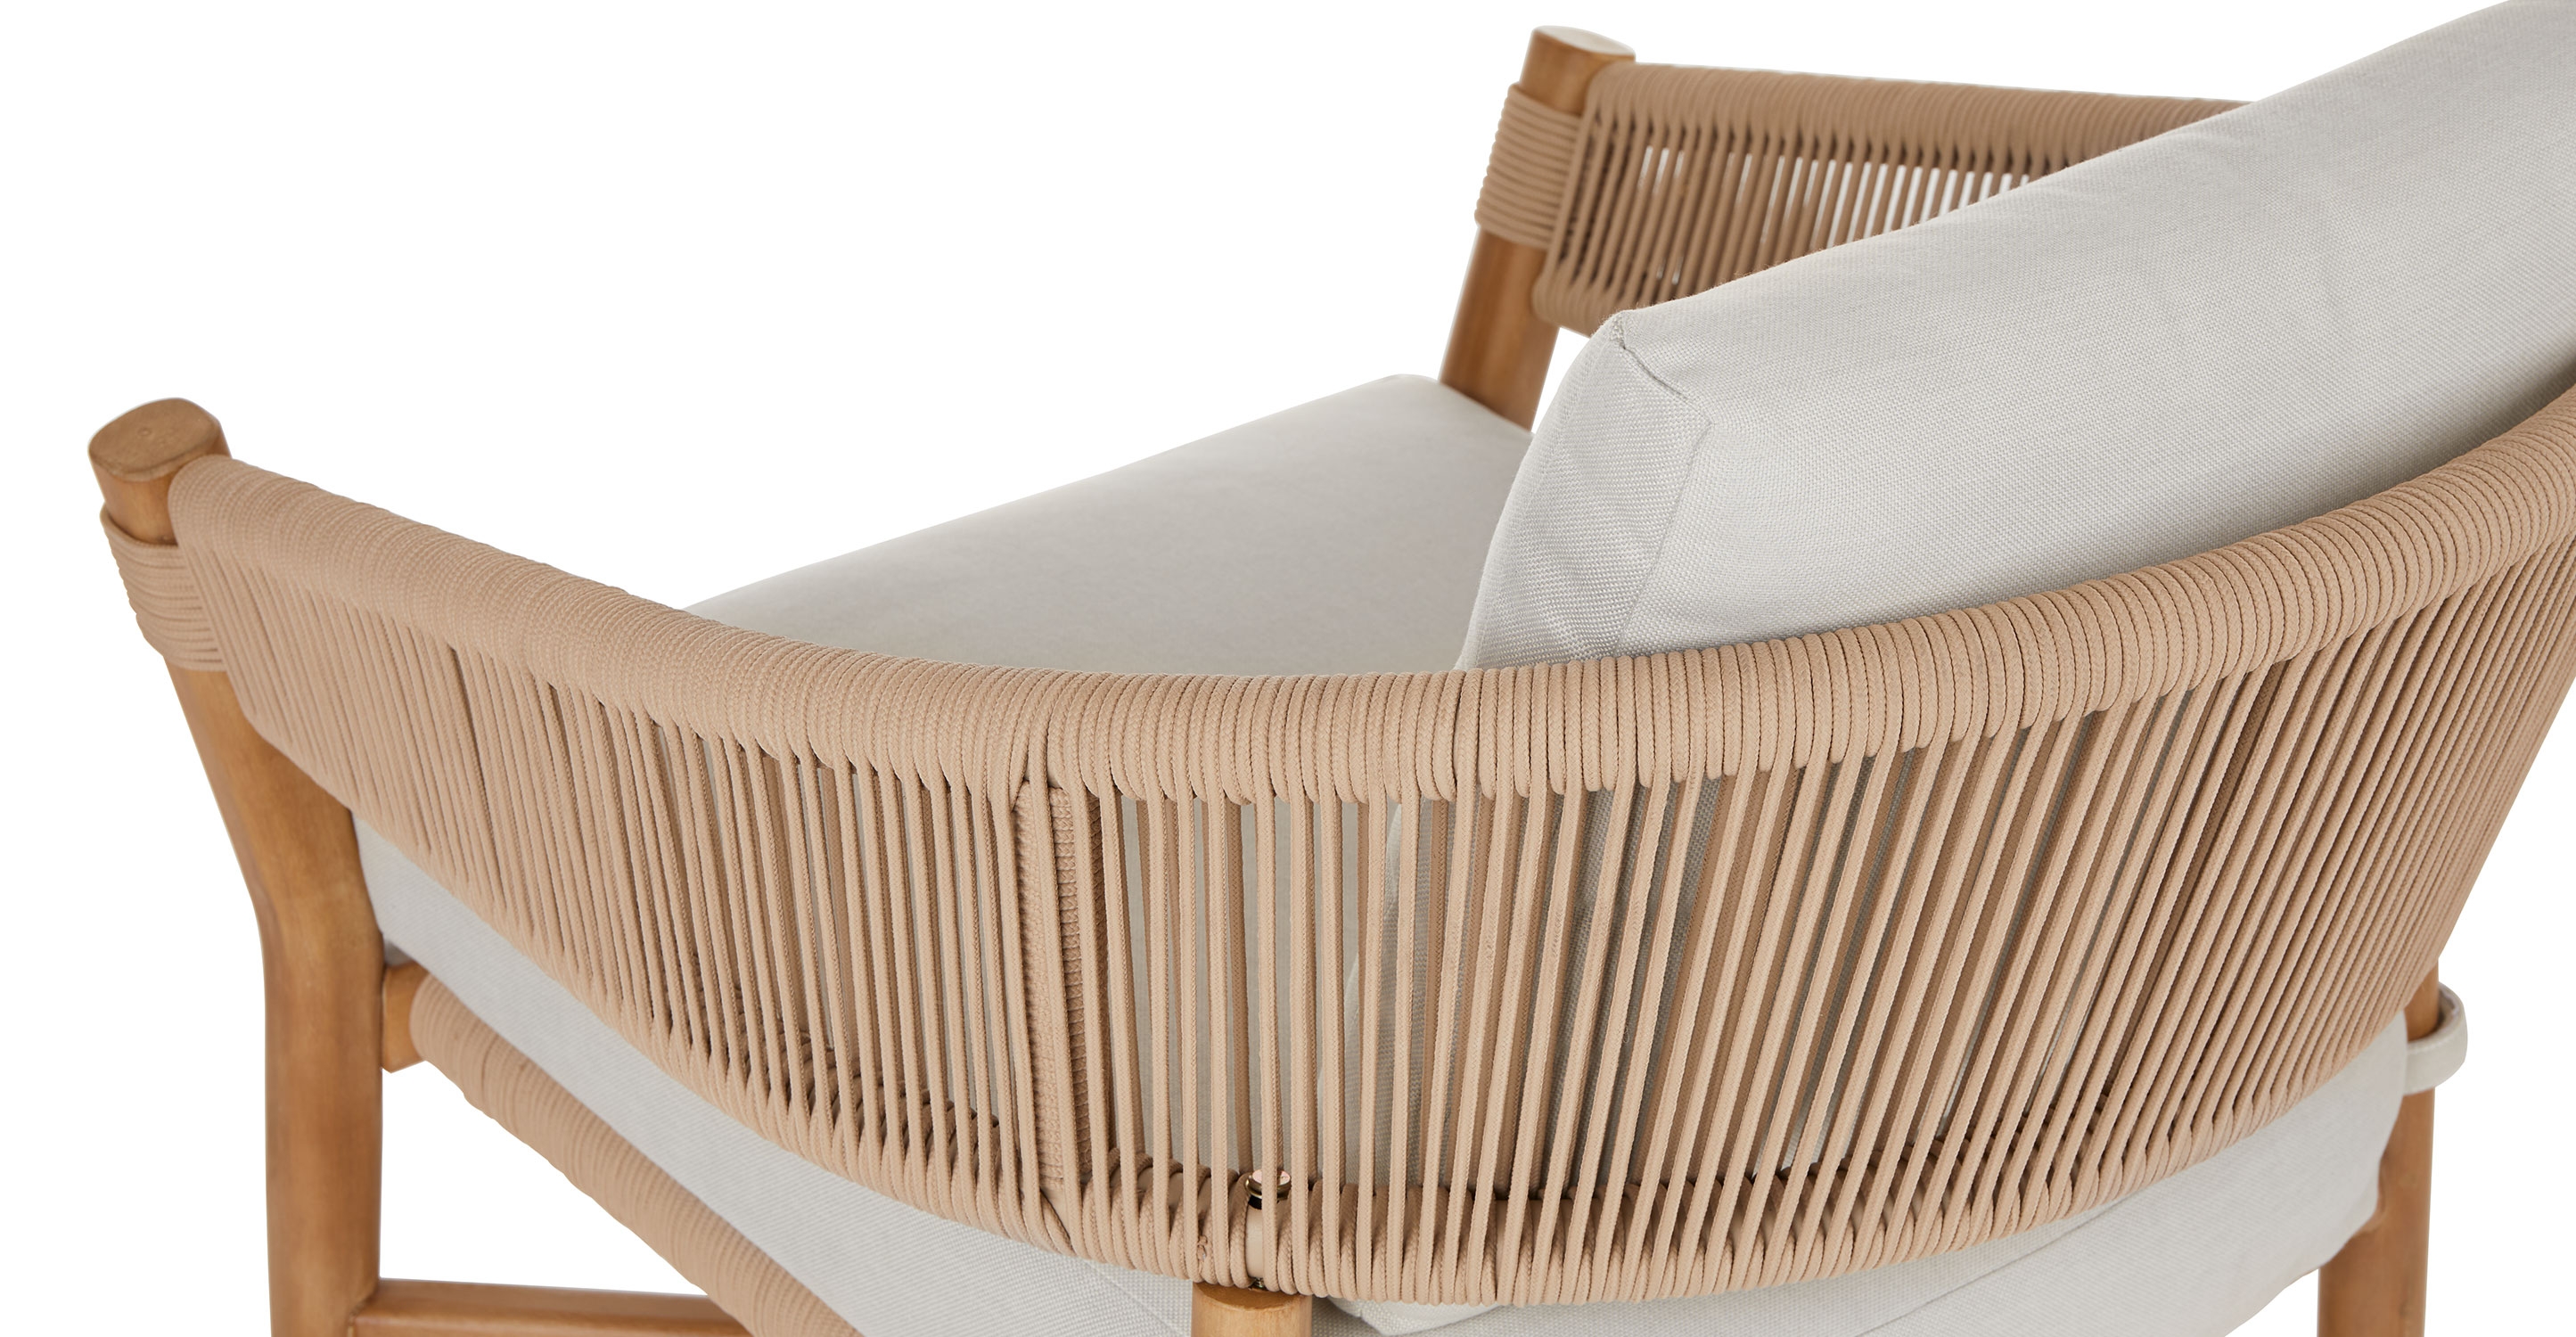 Makali Lounge Chair, Lily White - Image 5